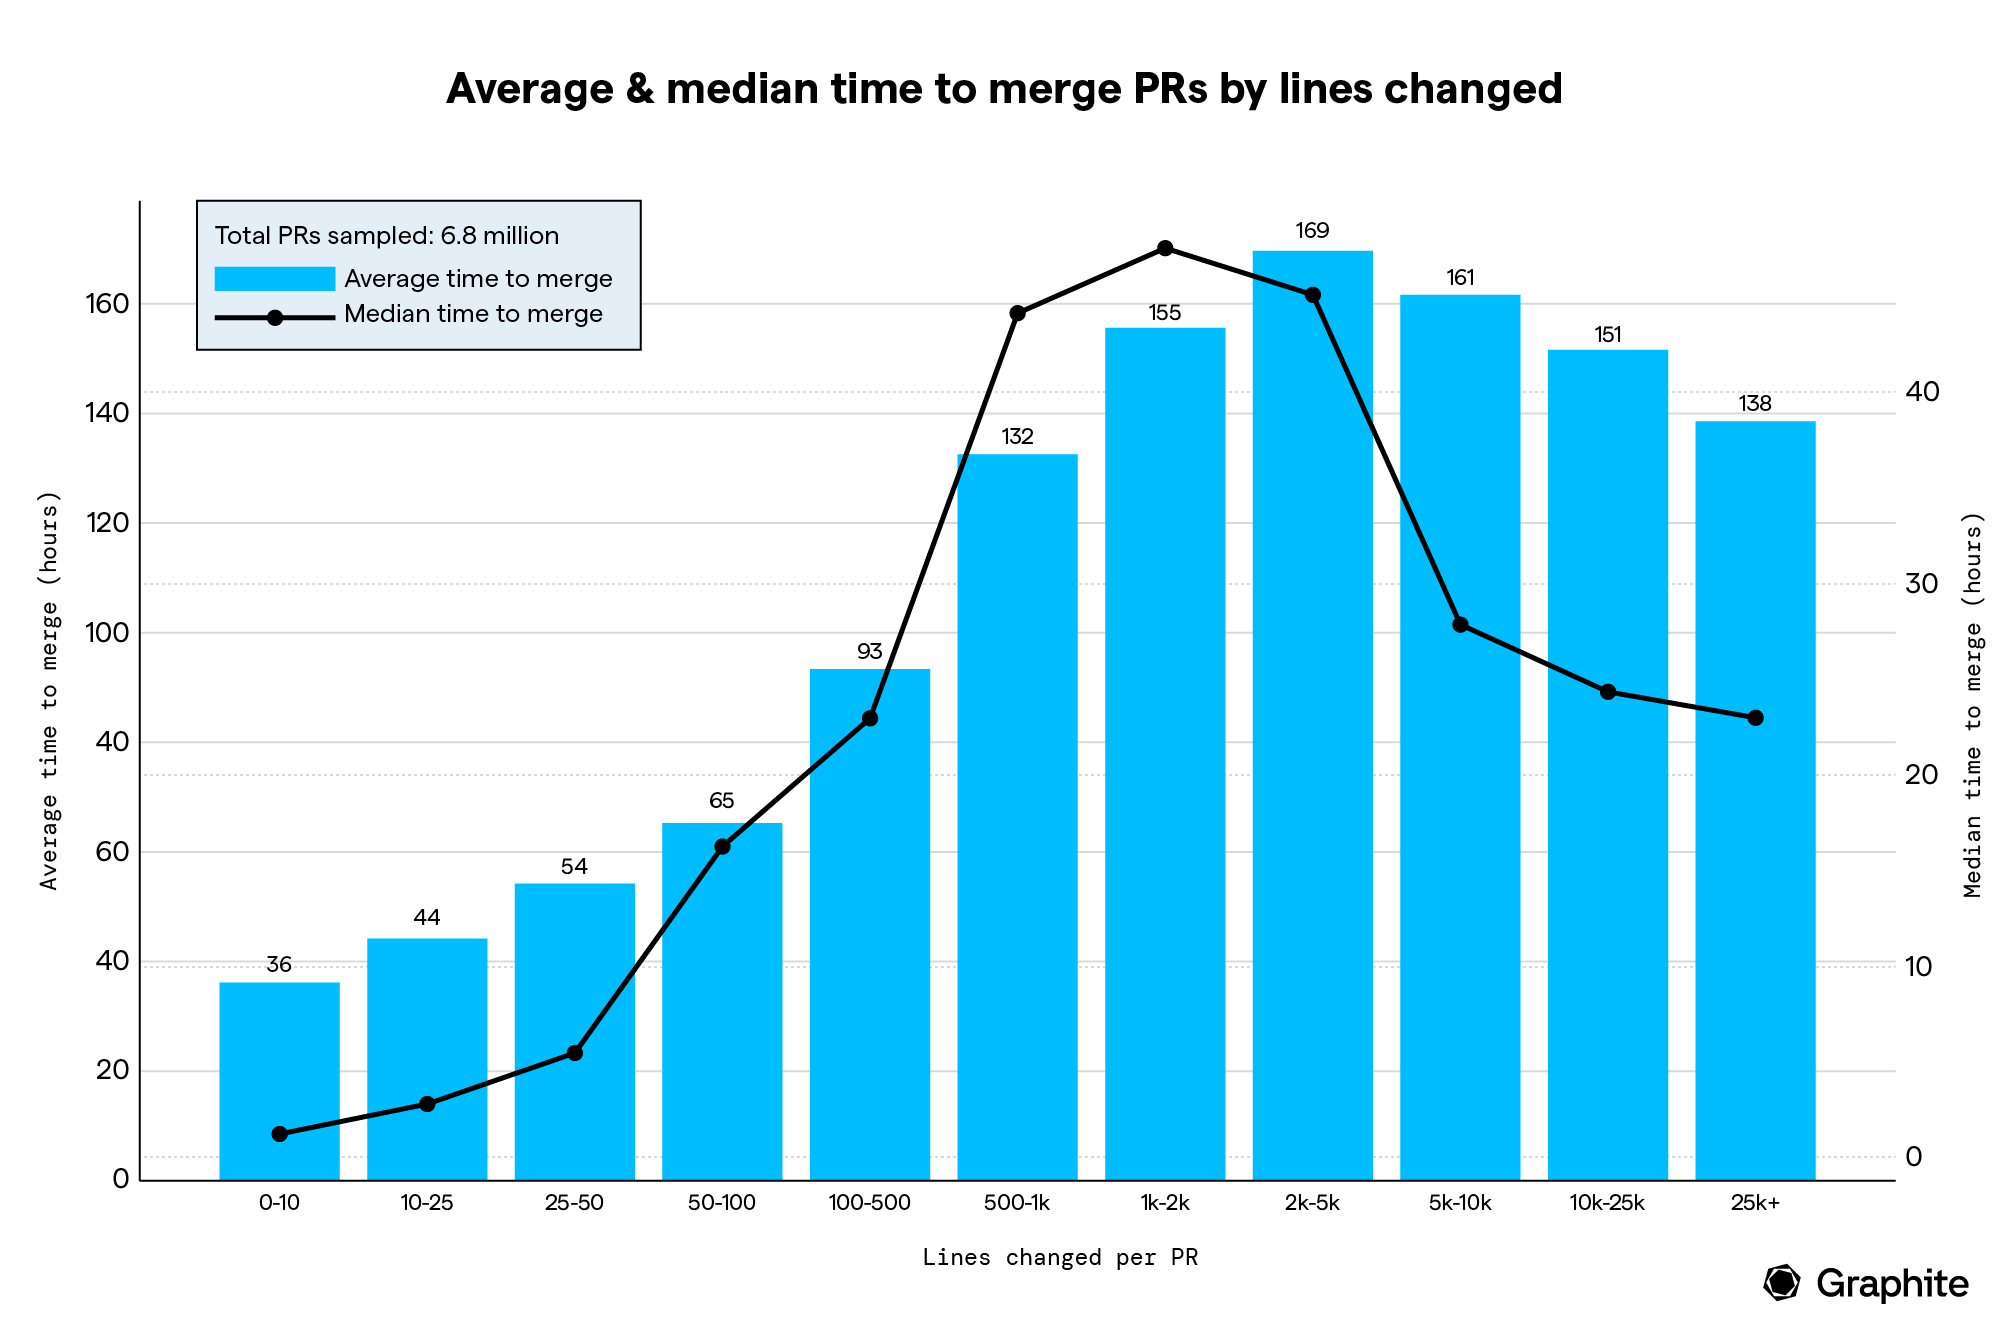 bar graph showing average and median times to merge PRs ranging from 36 hours to 160 hours